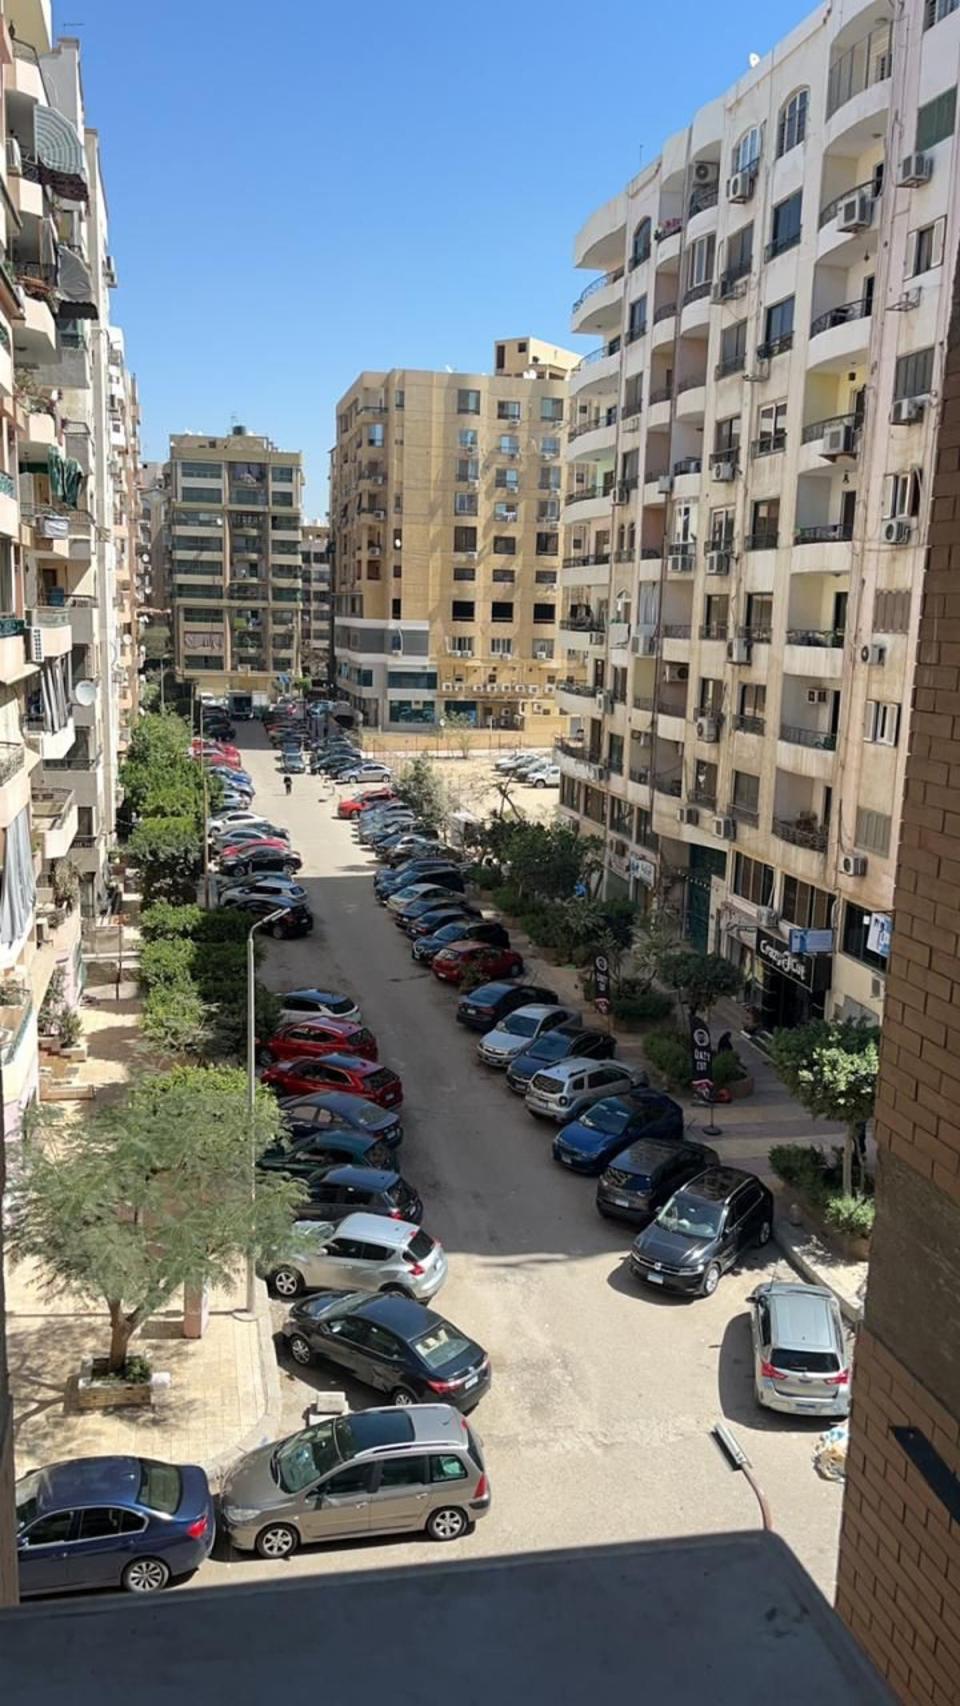 A view from Lna’s new room in Egypt (Provided)